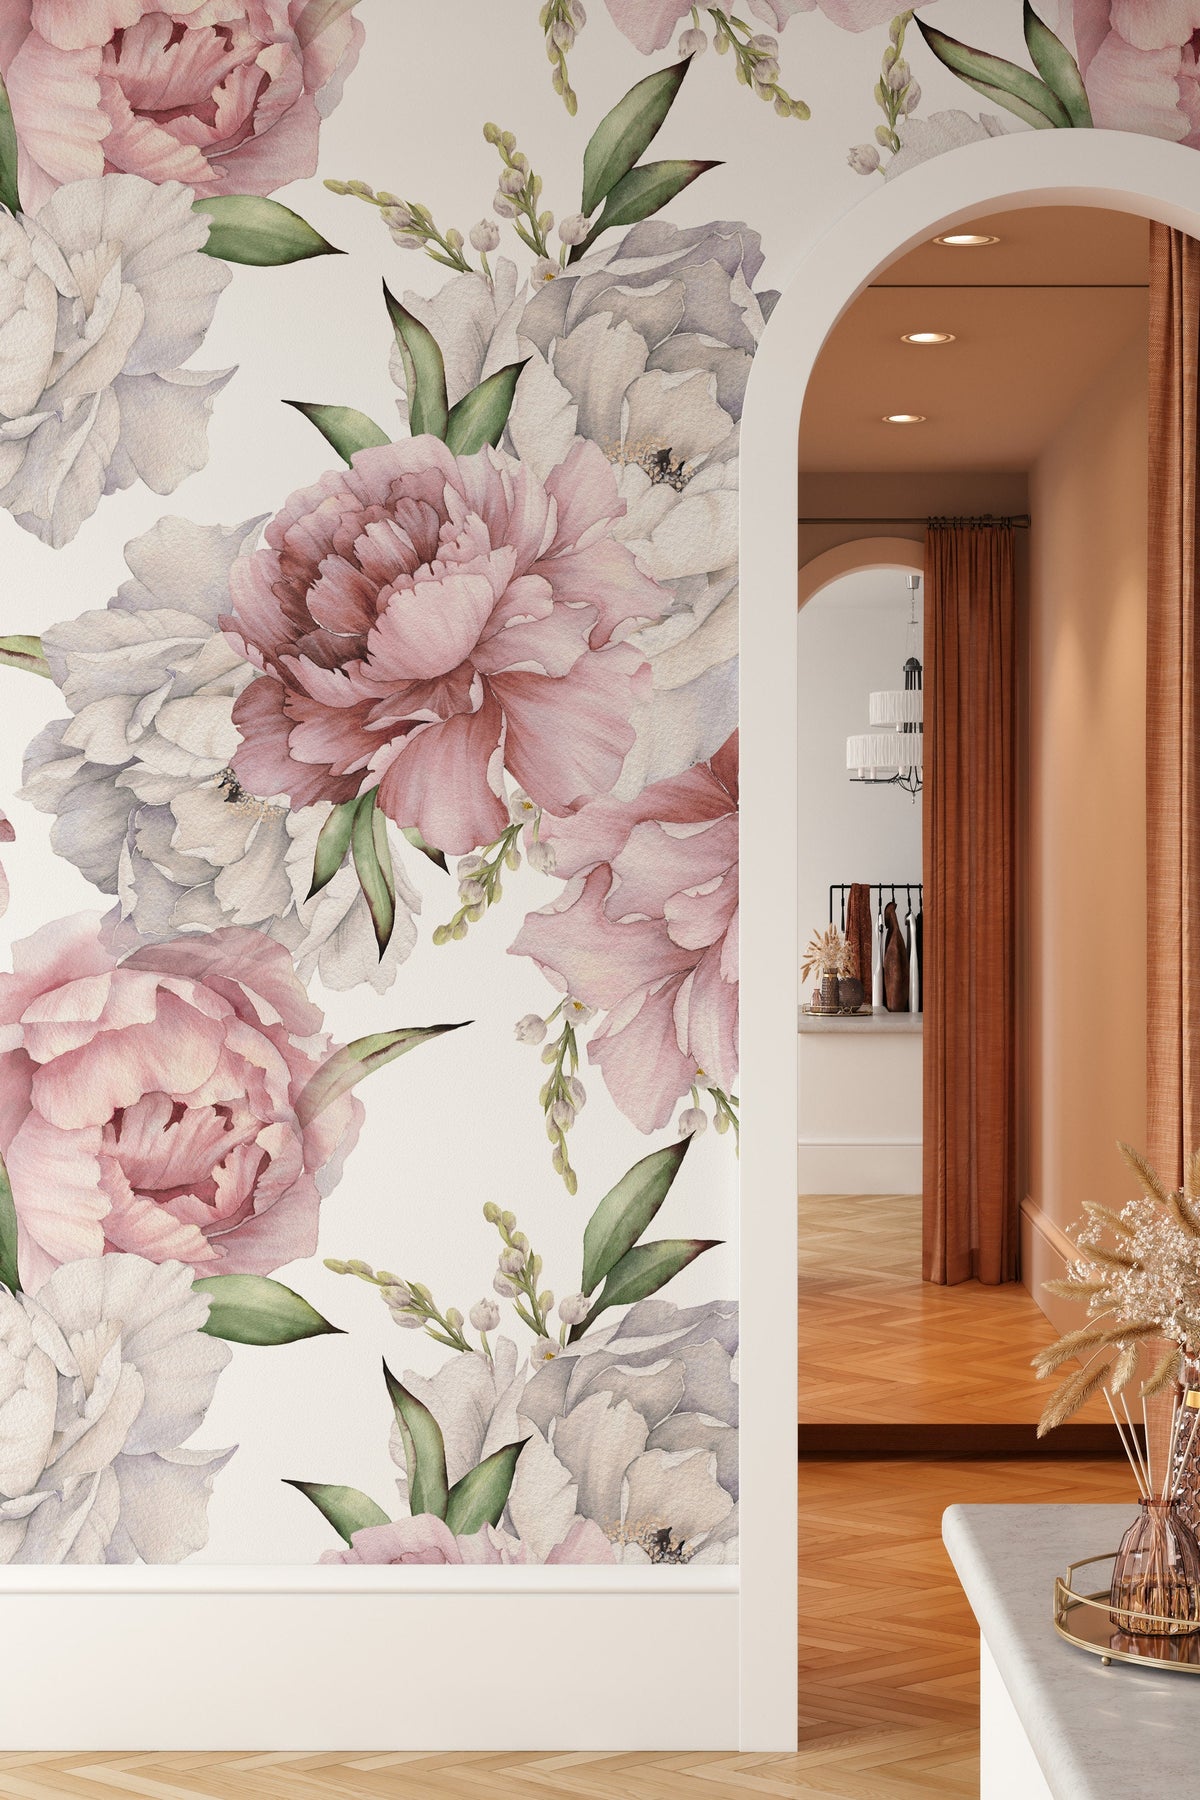 Peony Flower Wallpaper Peel and Stick Wallpaper Dark Floral  Etsy  Flower  wallpaper Peony wallpaper Floral wall decor